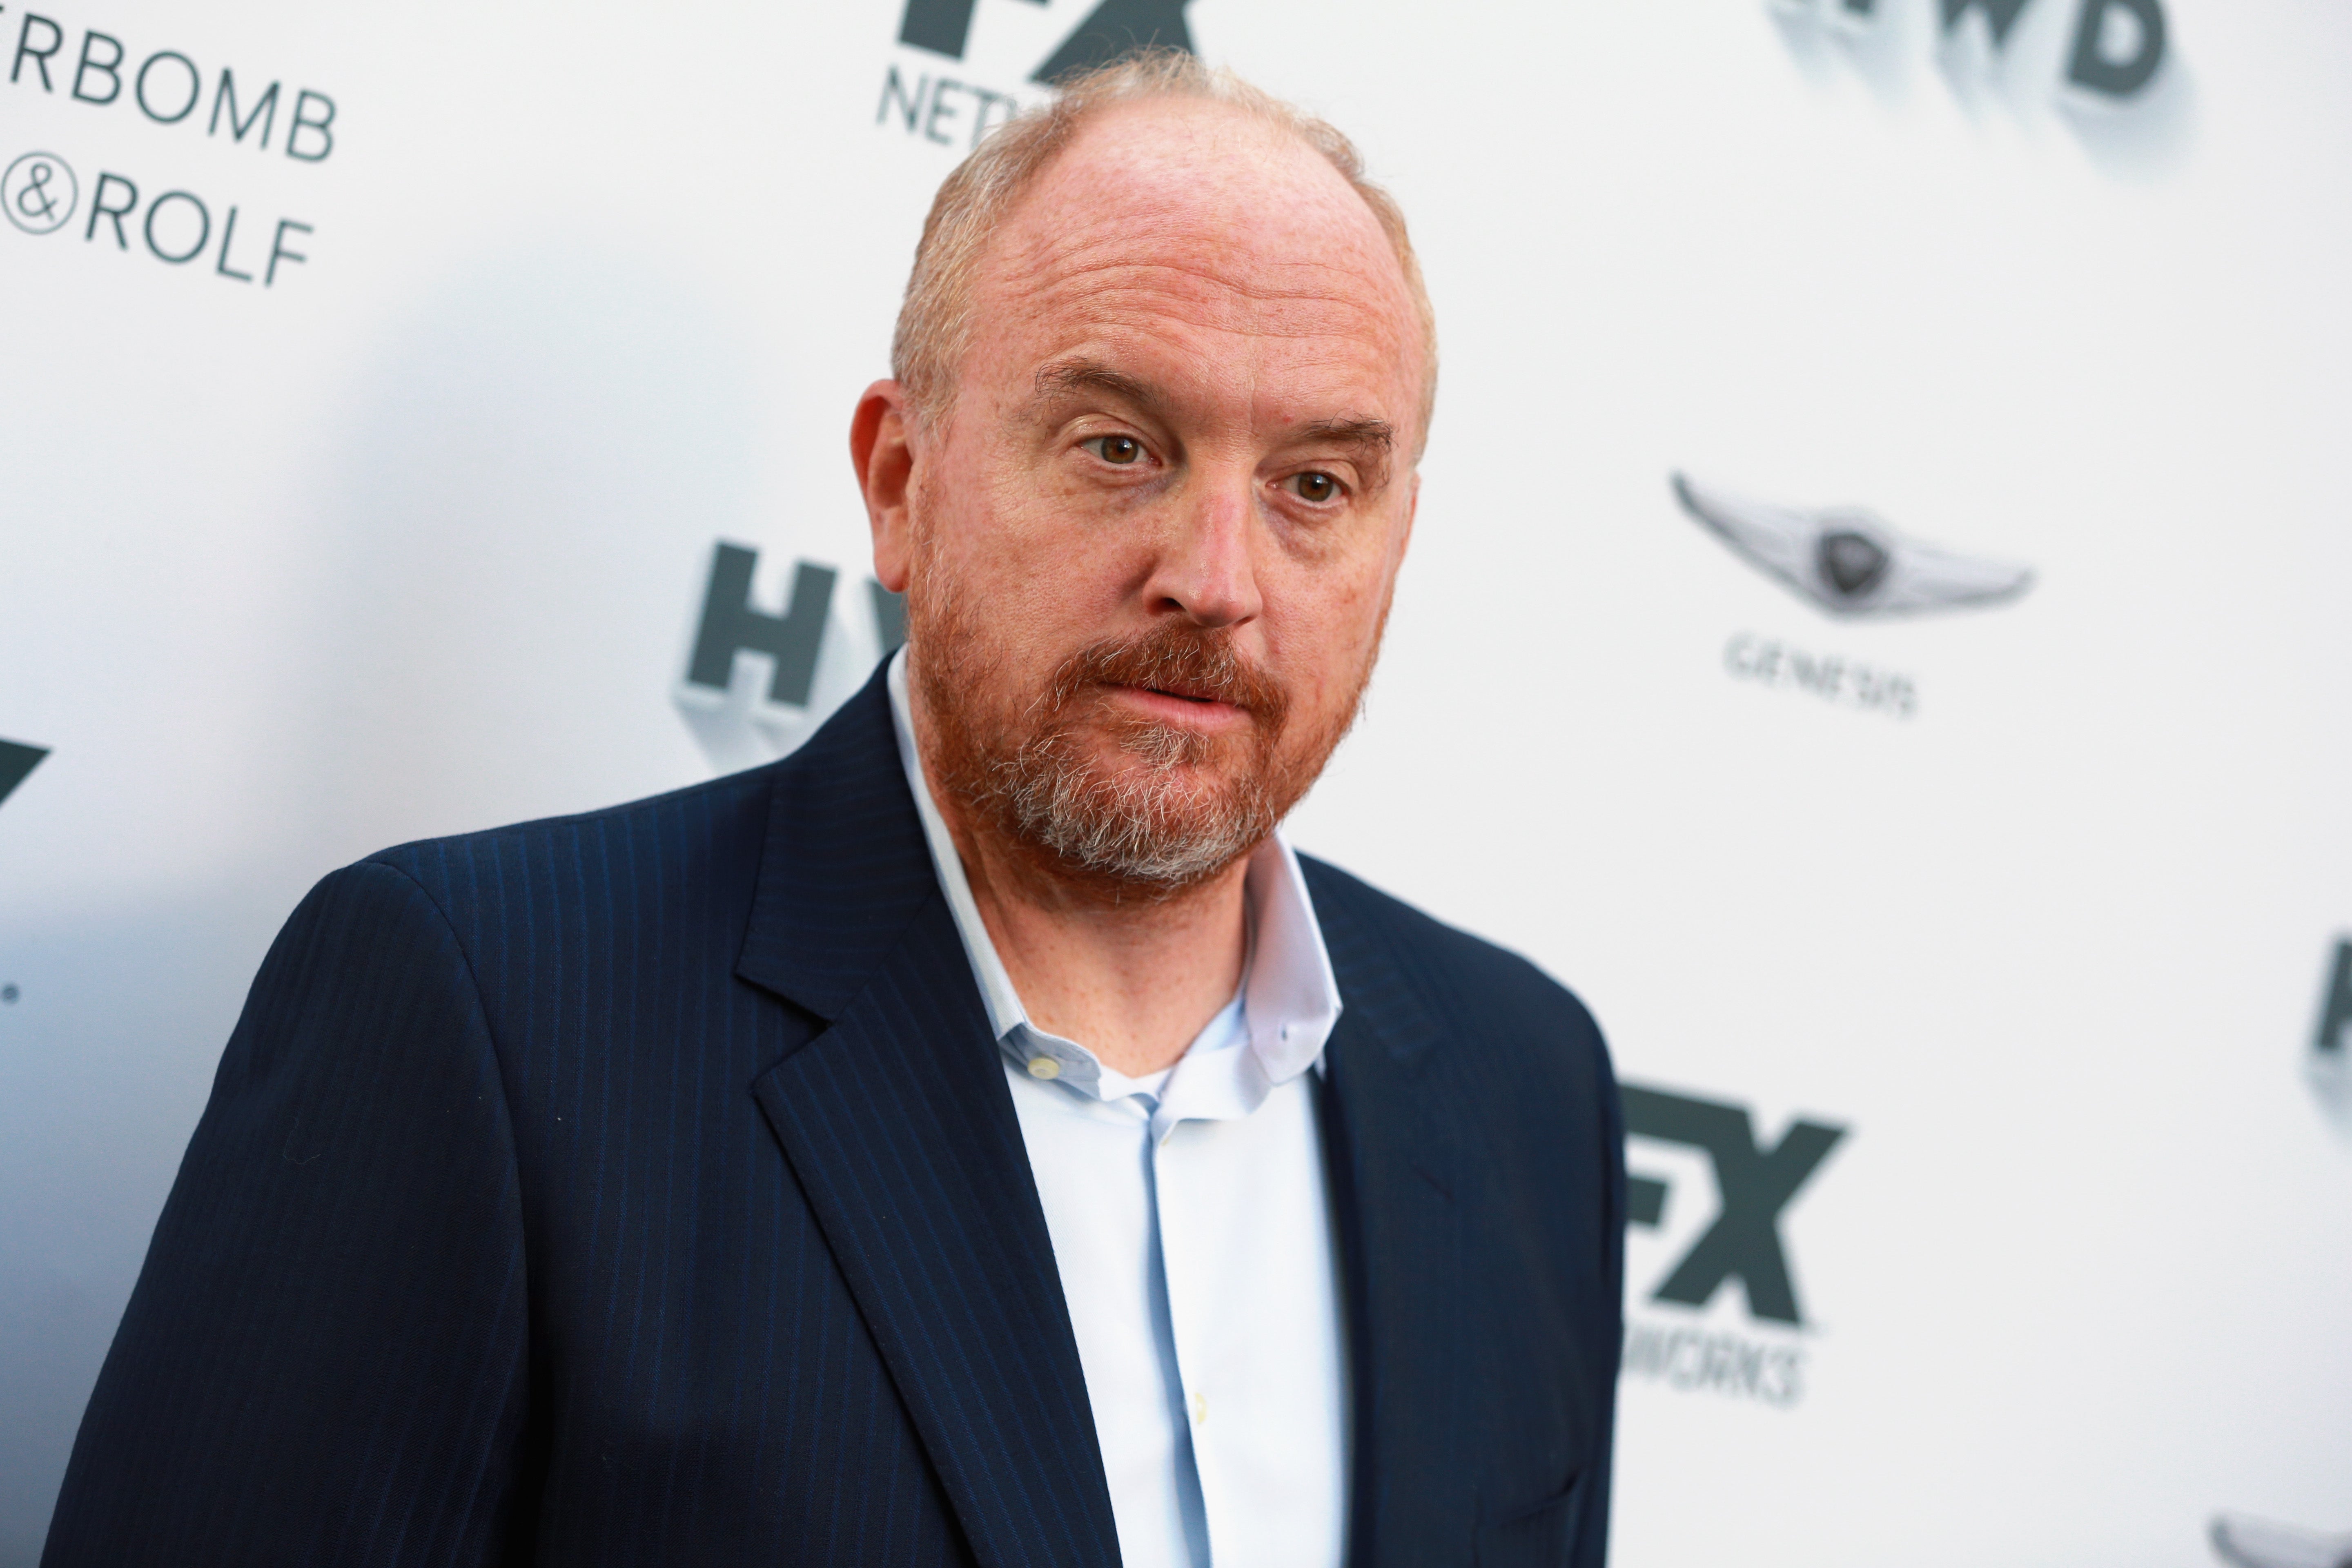 Louis CK isn’t a war hero coming back from the trenches; he is a sexual predator who abused his position of power